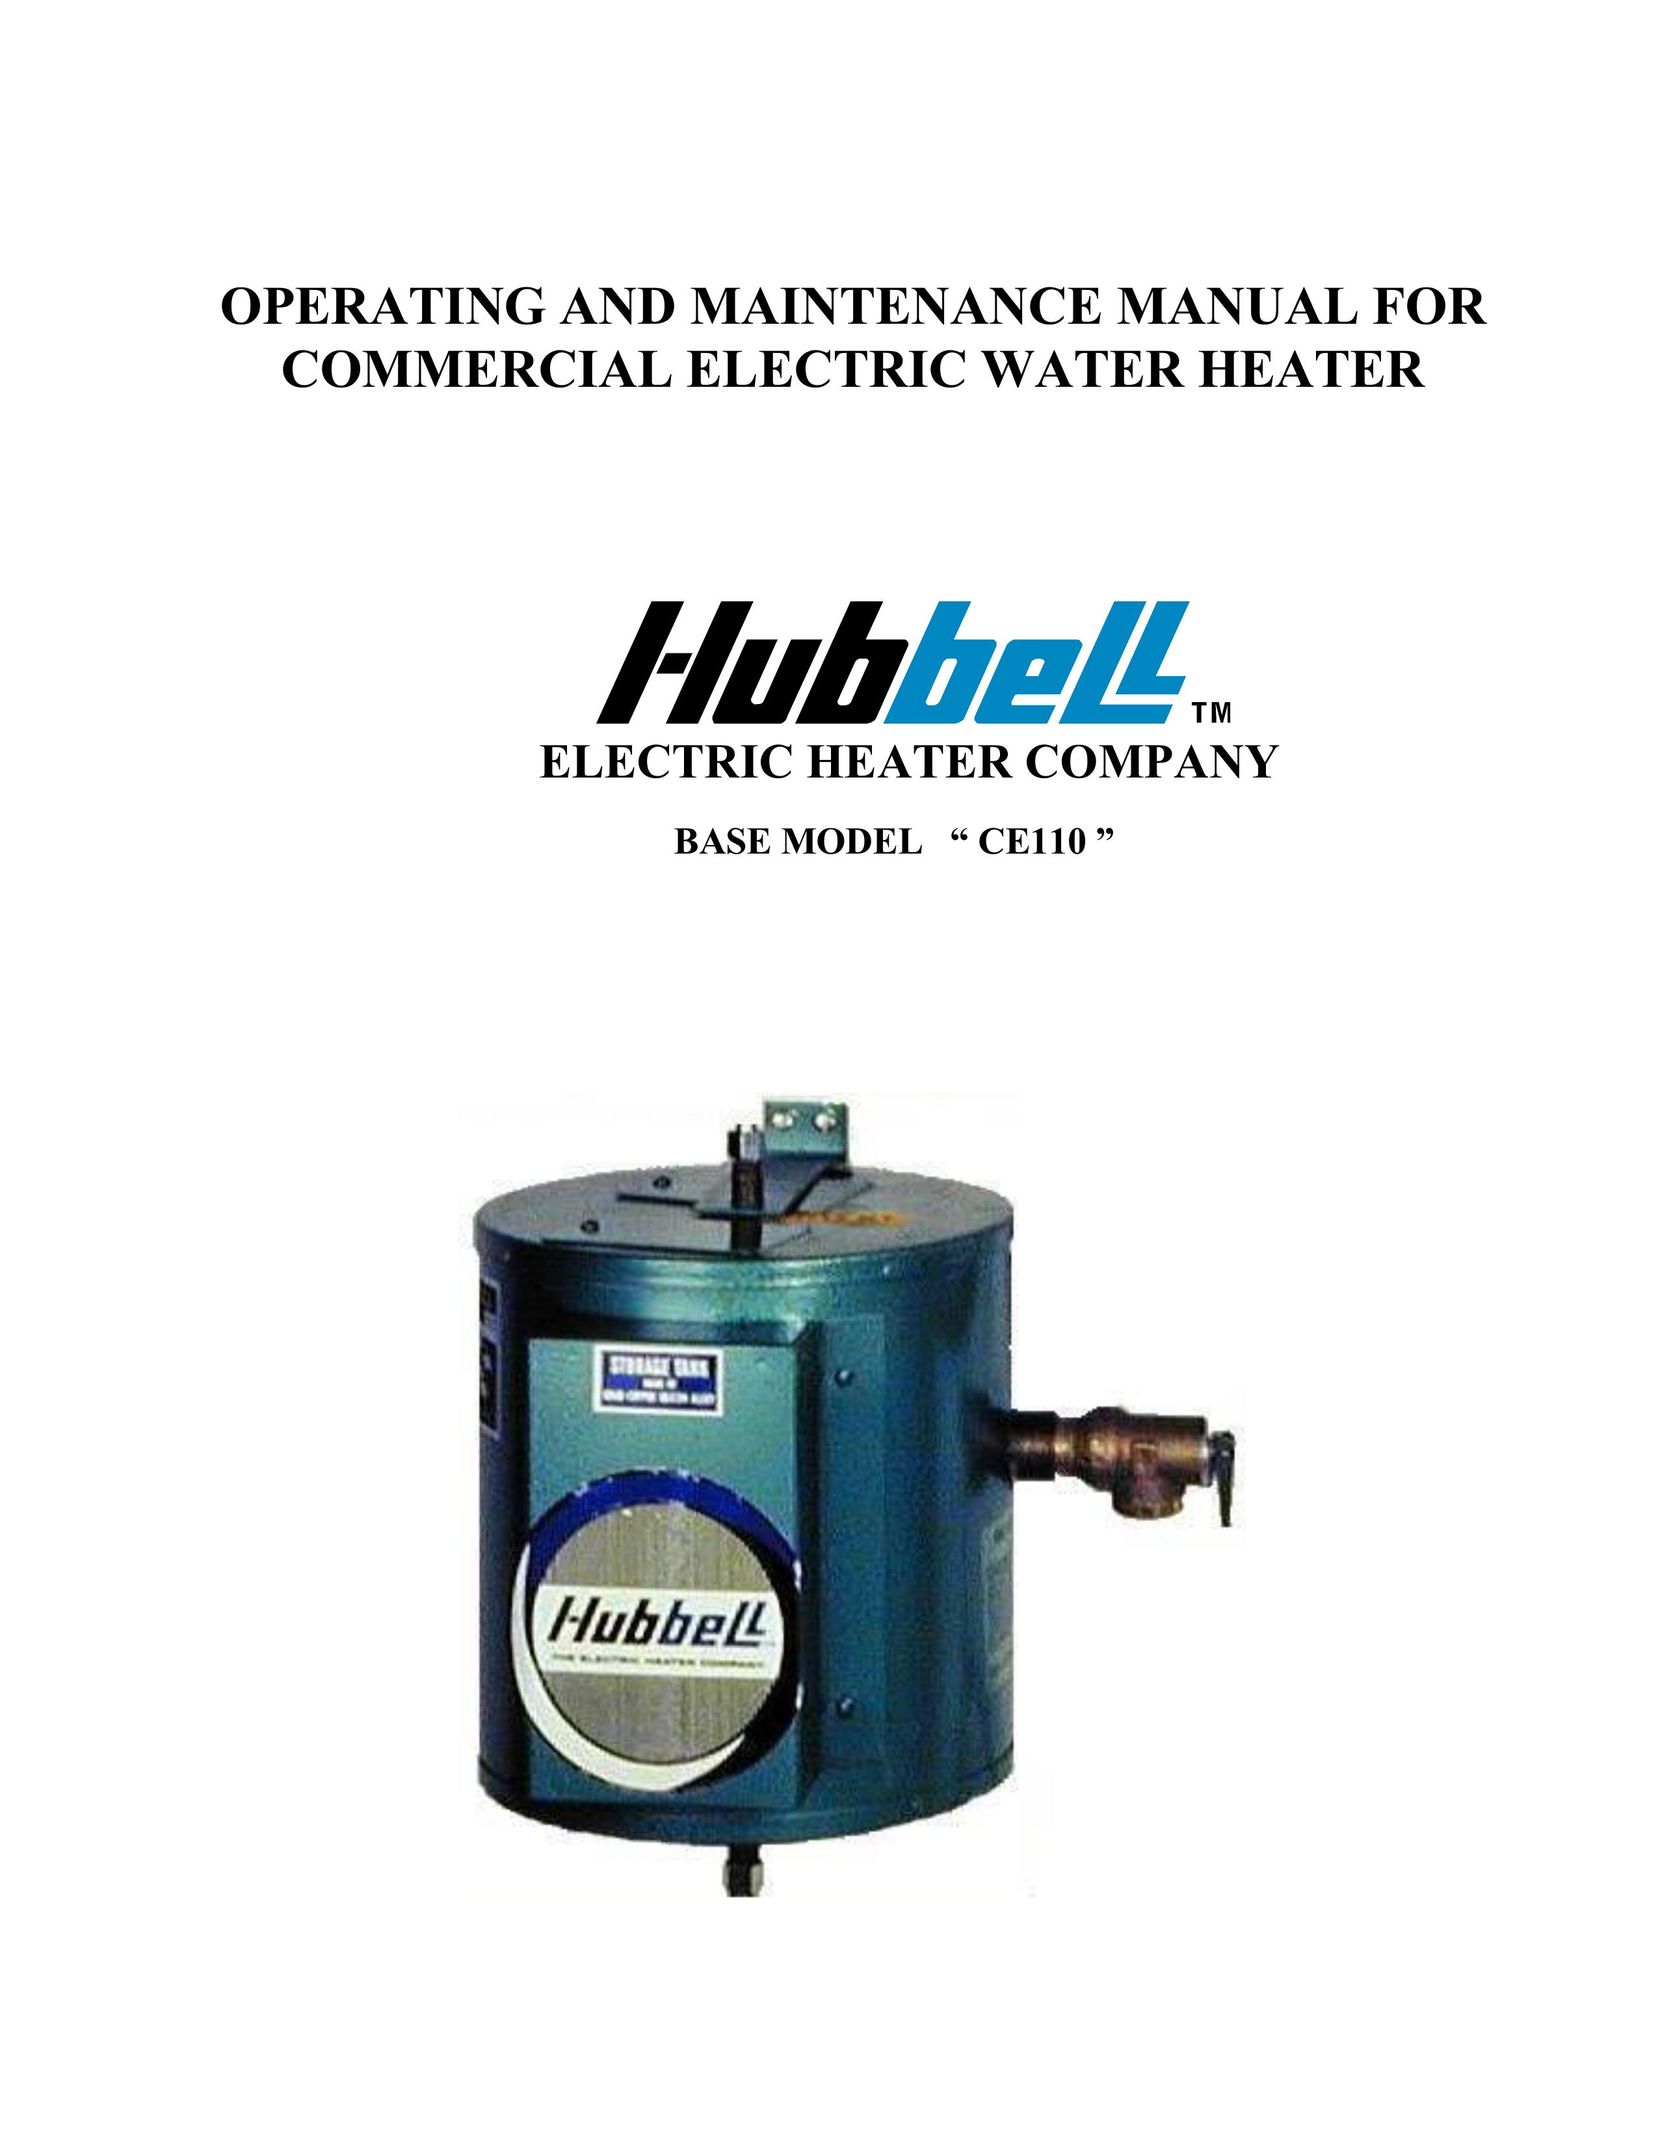 Hubbell Electric Heater Company CE110 Water Heater User Manual